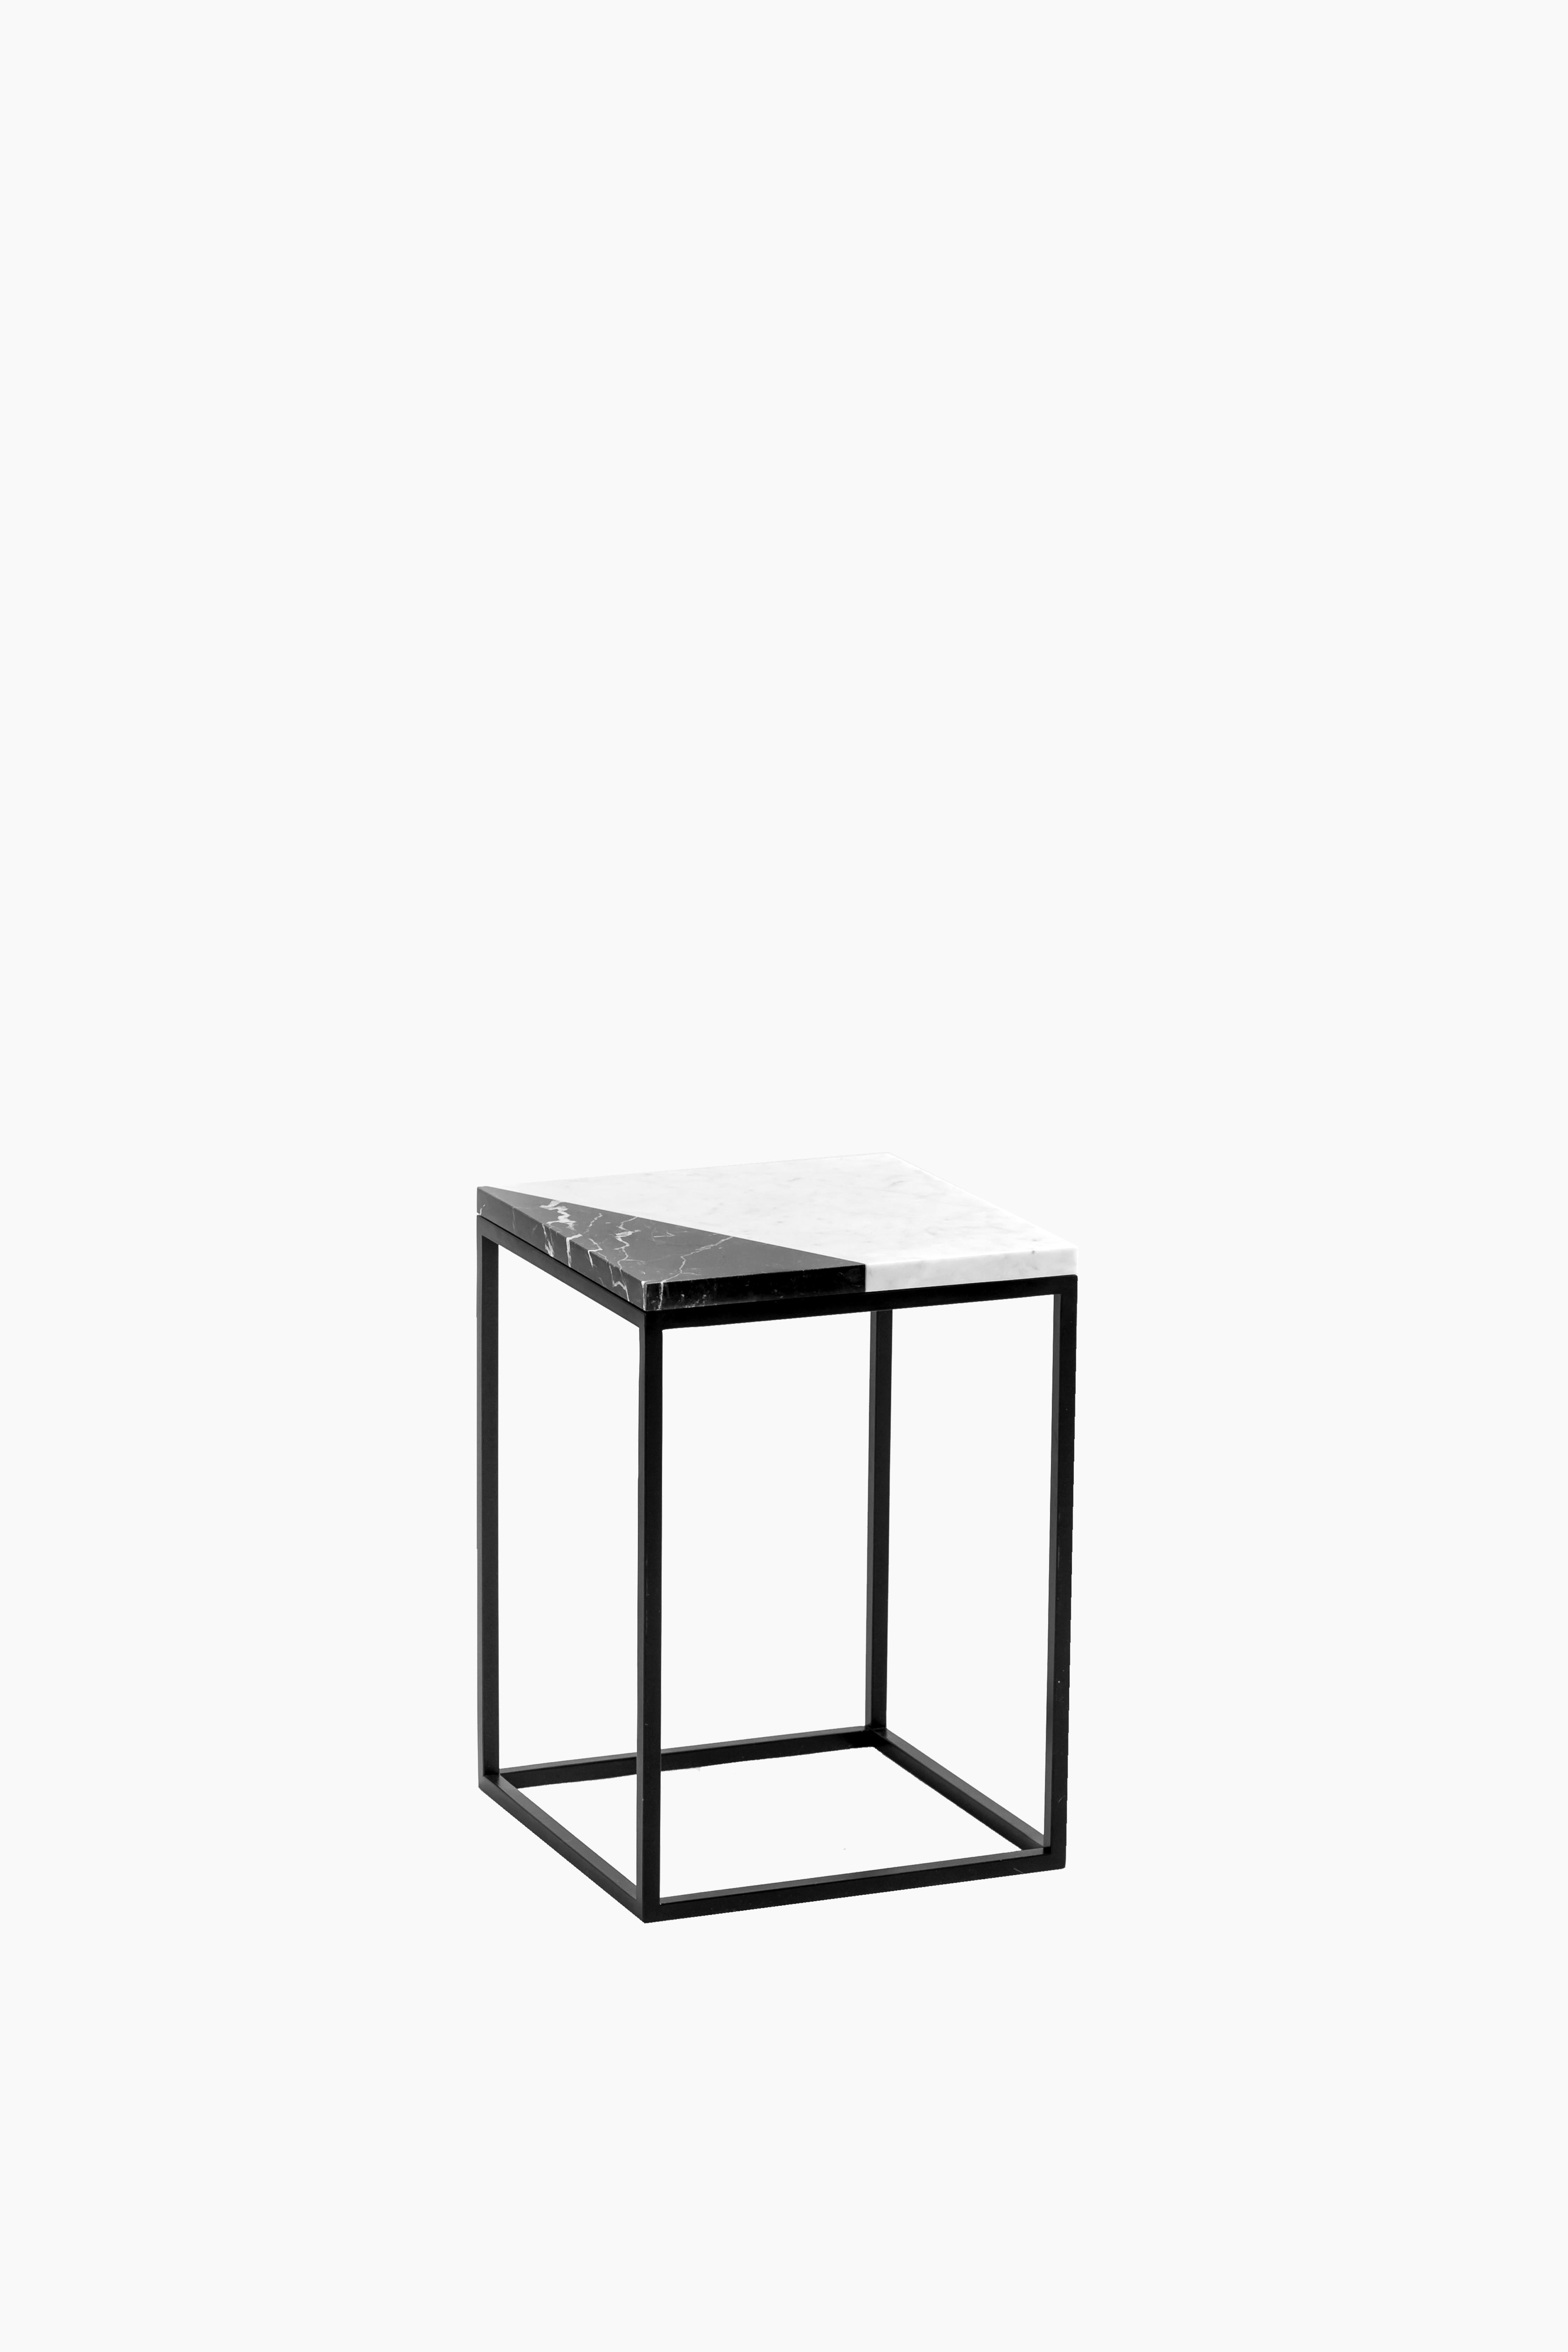 Set of 2 small black and white Cut side table by Un’common.
Dimensions: W 30 x D 30 x H 42 cm.
Materials: White Carrara marble, Nero Marquina marble, steel.
Available in 2 sizes: H 42, H 72 cm.

Black Cut and White Cut can be used as a pillar,